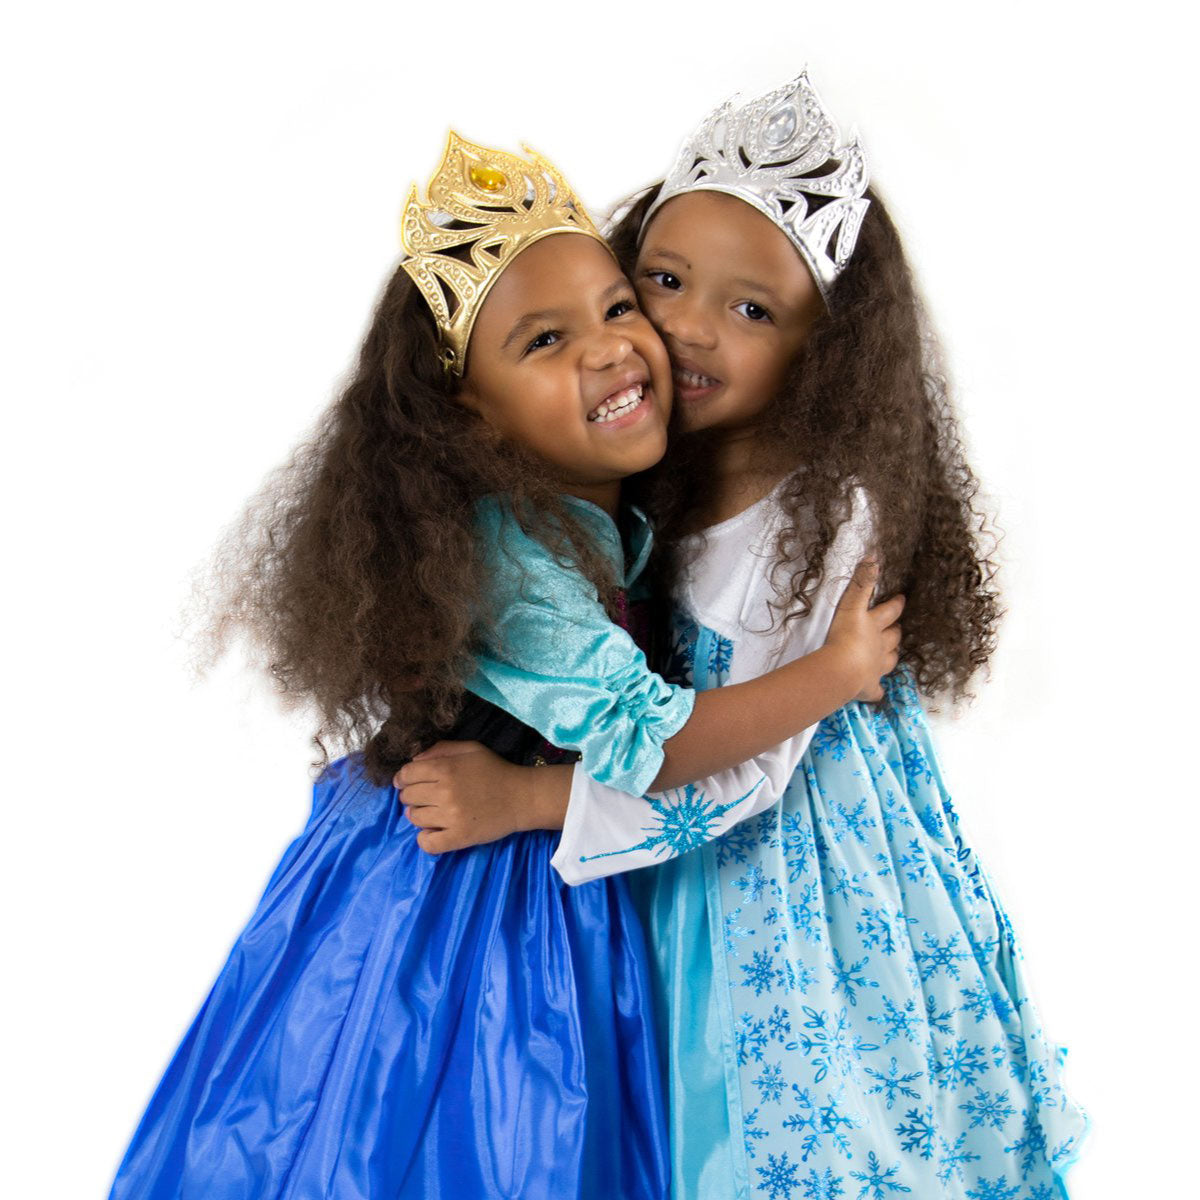 Alpine & Ice Princess Soft Crowns from Little Adventures